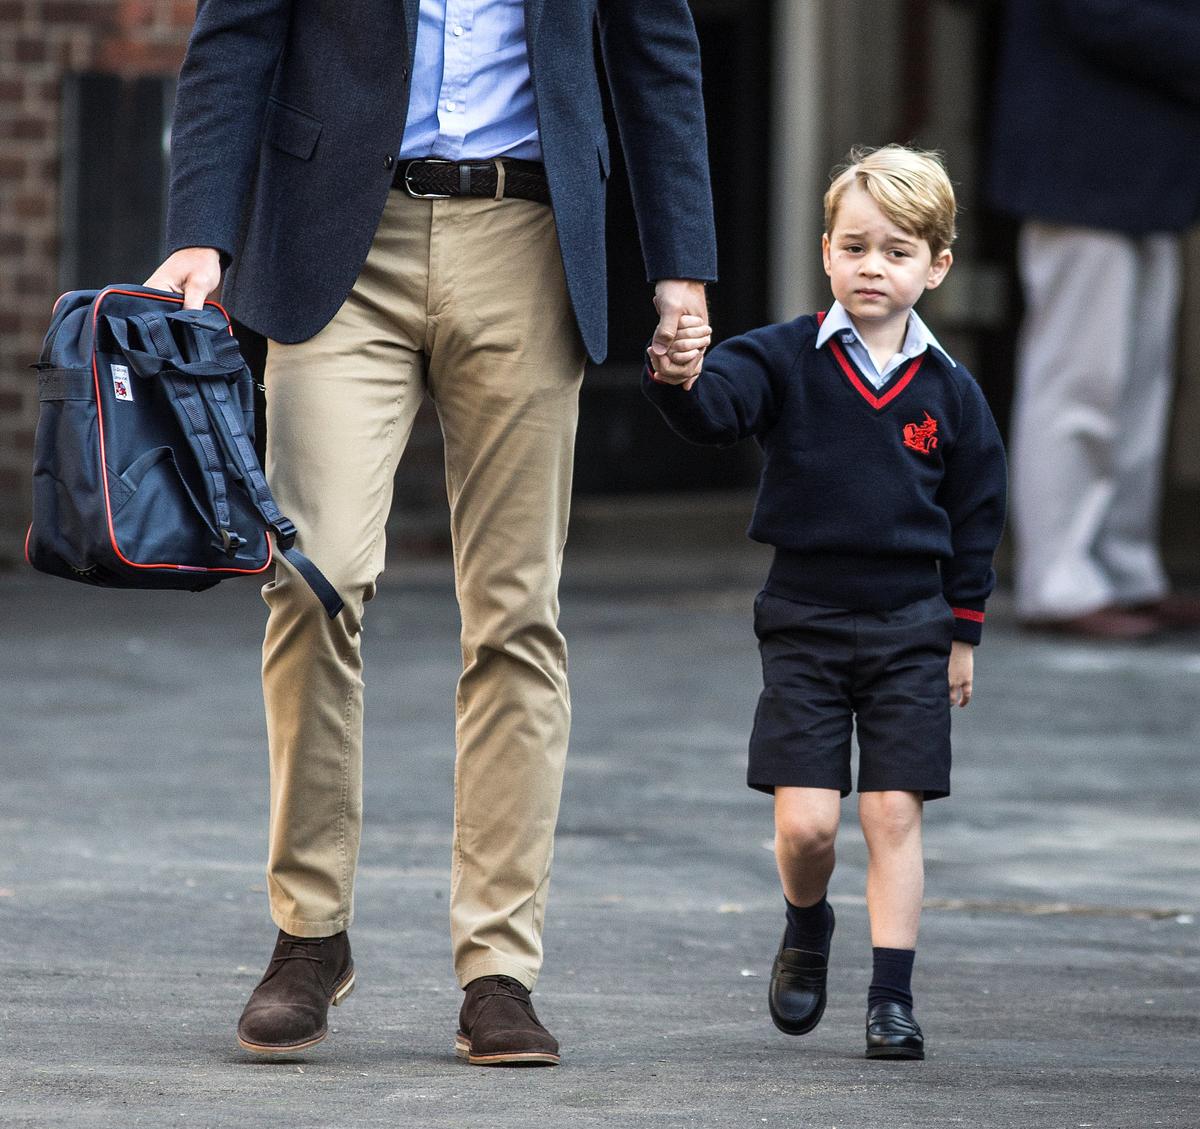 Prince George holds his father Britain's Prince William's hand as he arrives on his first day of school at Thomas's school in Battersea, London on Sept. 7, 2017. (REUTERS/Richard Pohle/Pool)